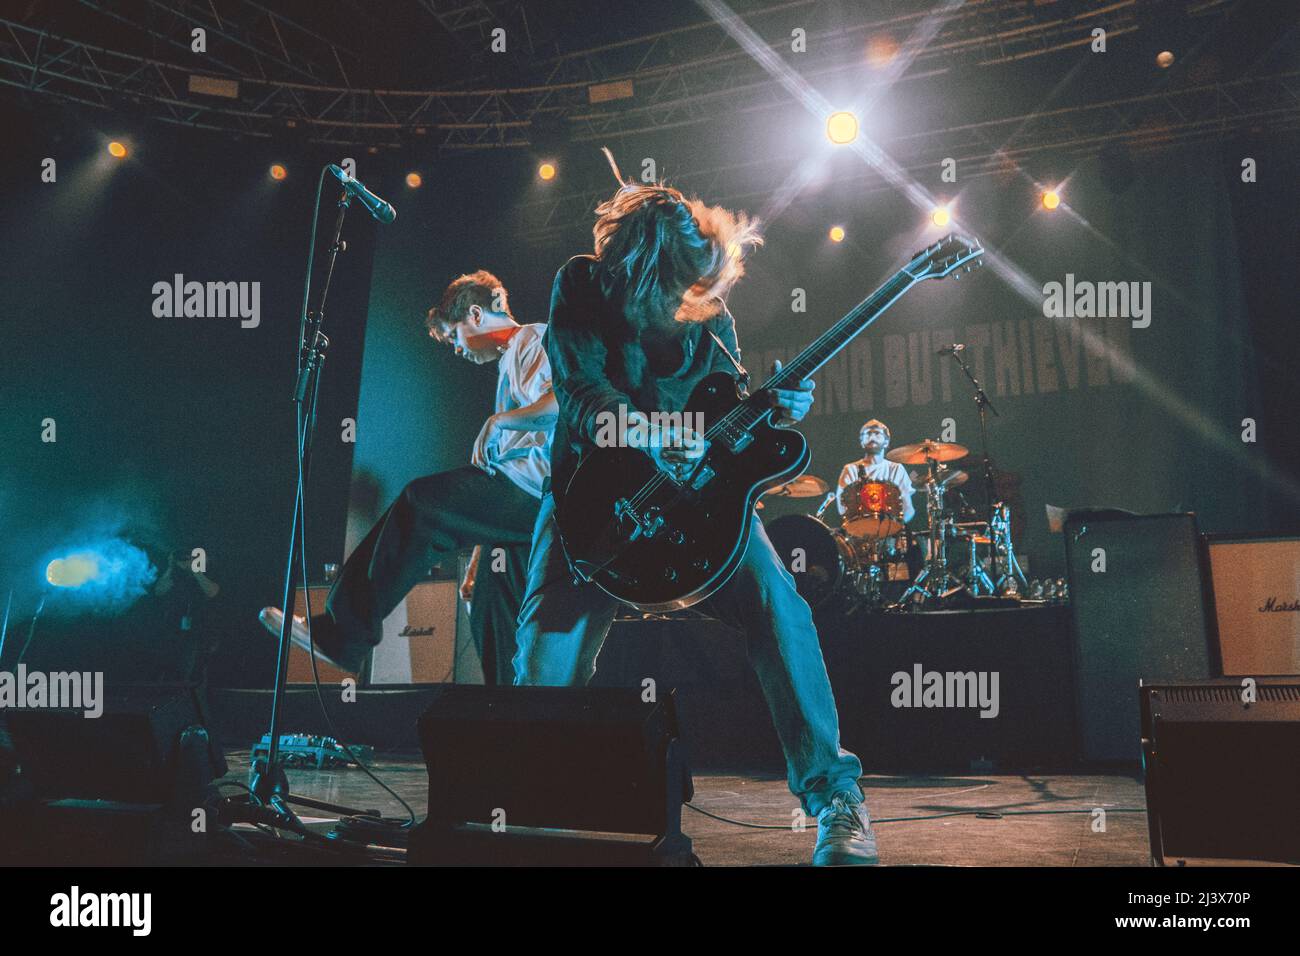 03/04/2022 - English rock band NOTHING BUT THIEVES playing their first live show after COVID, live at Fabrique Milano, Italy. Stock Photo